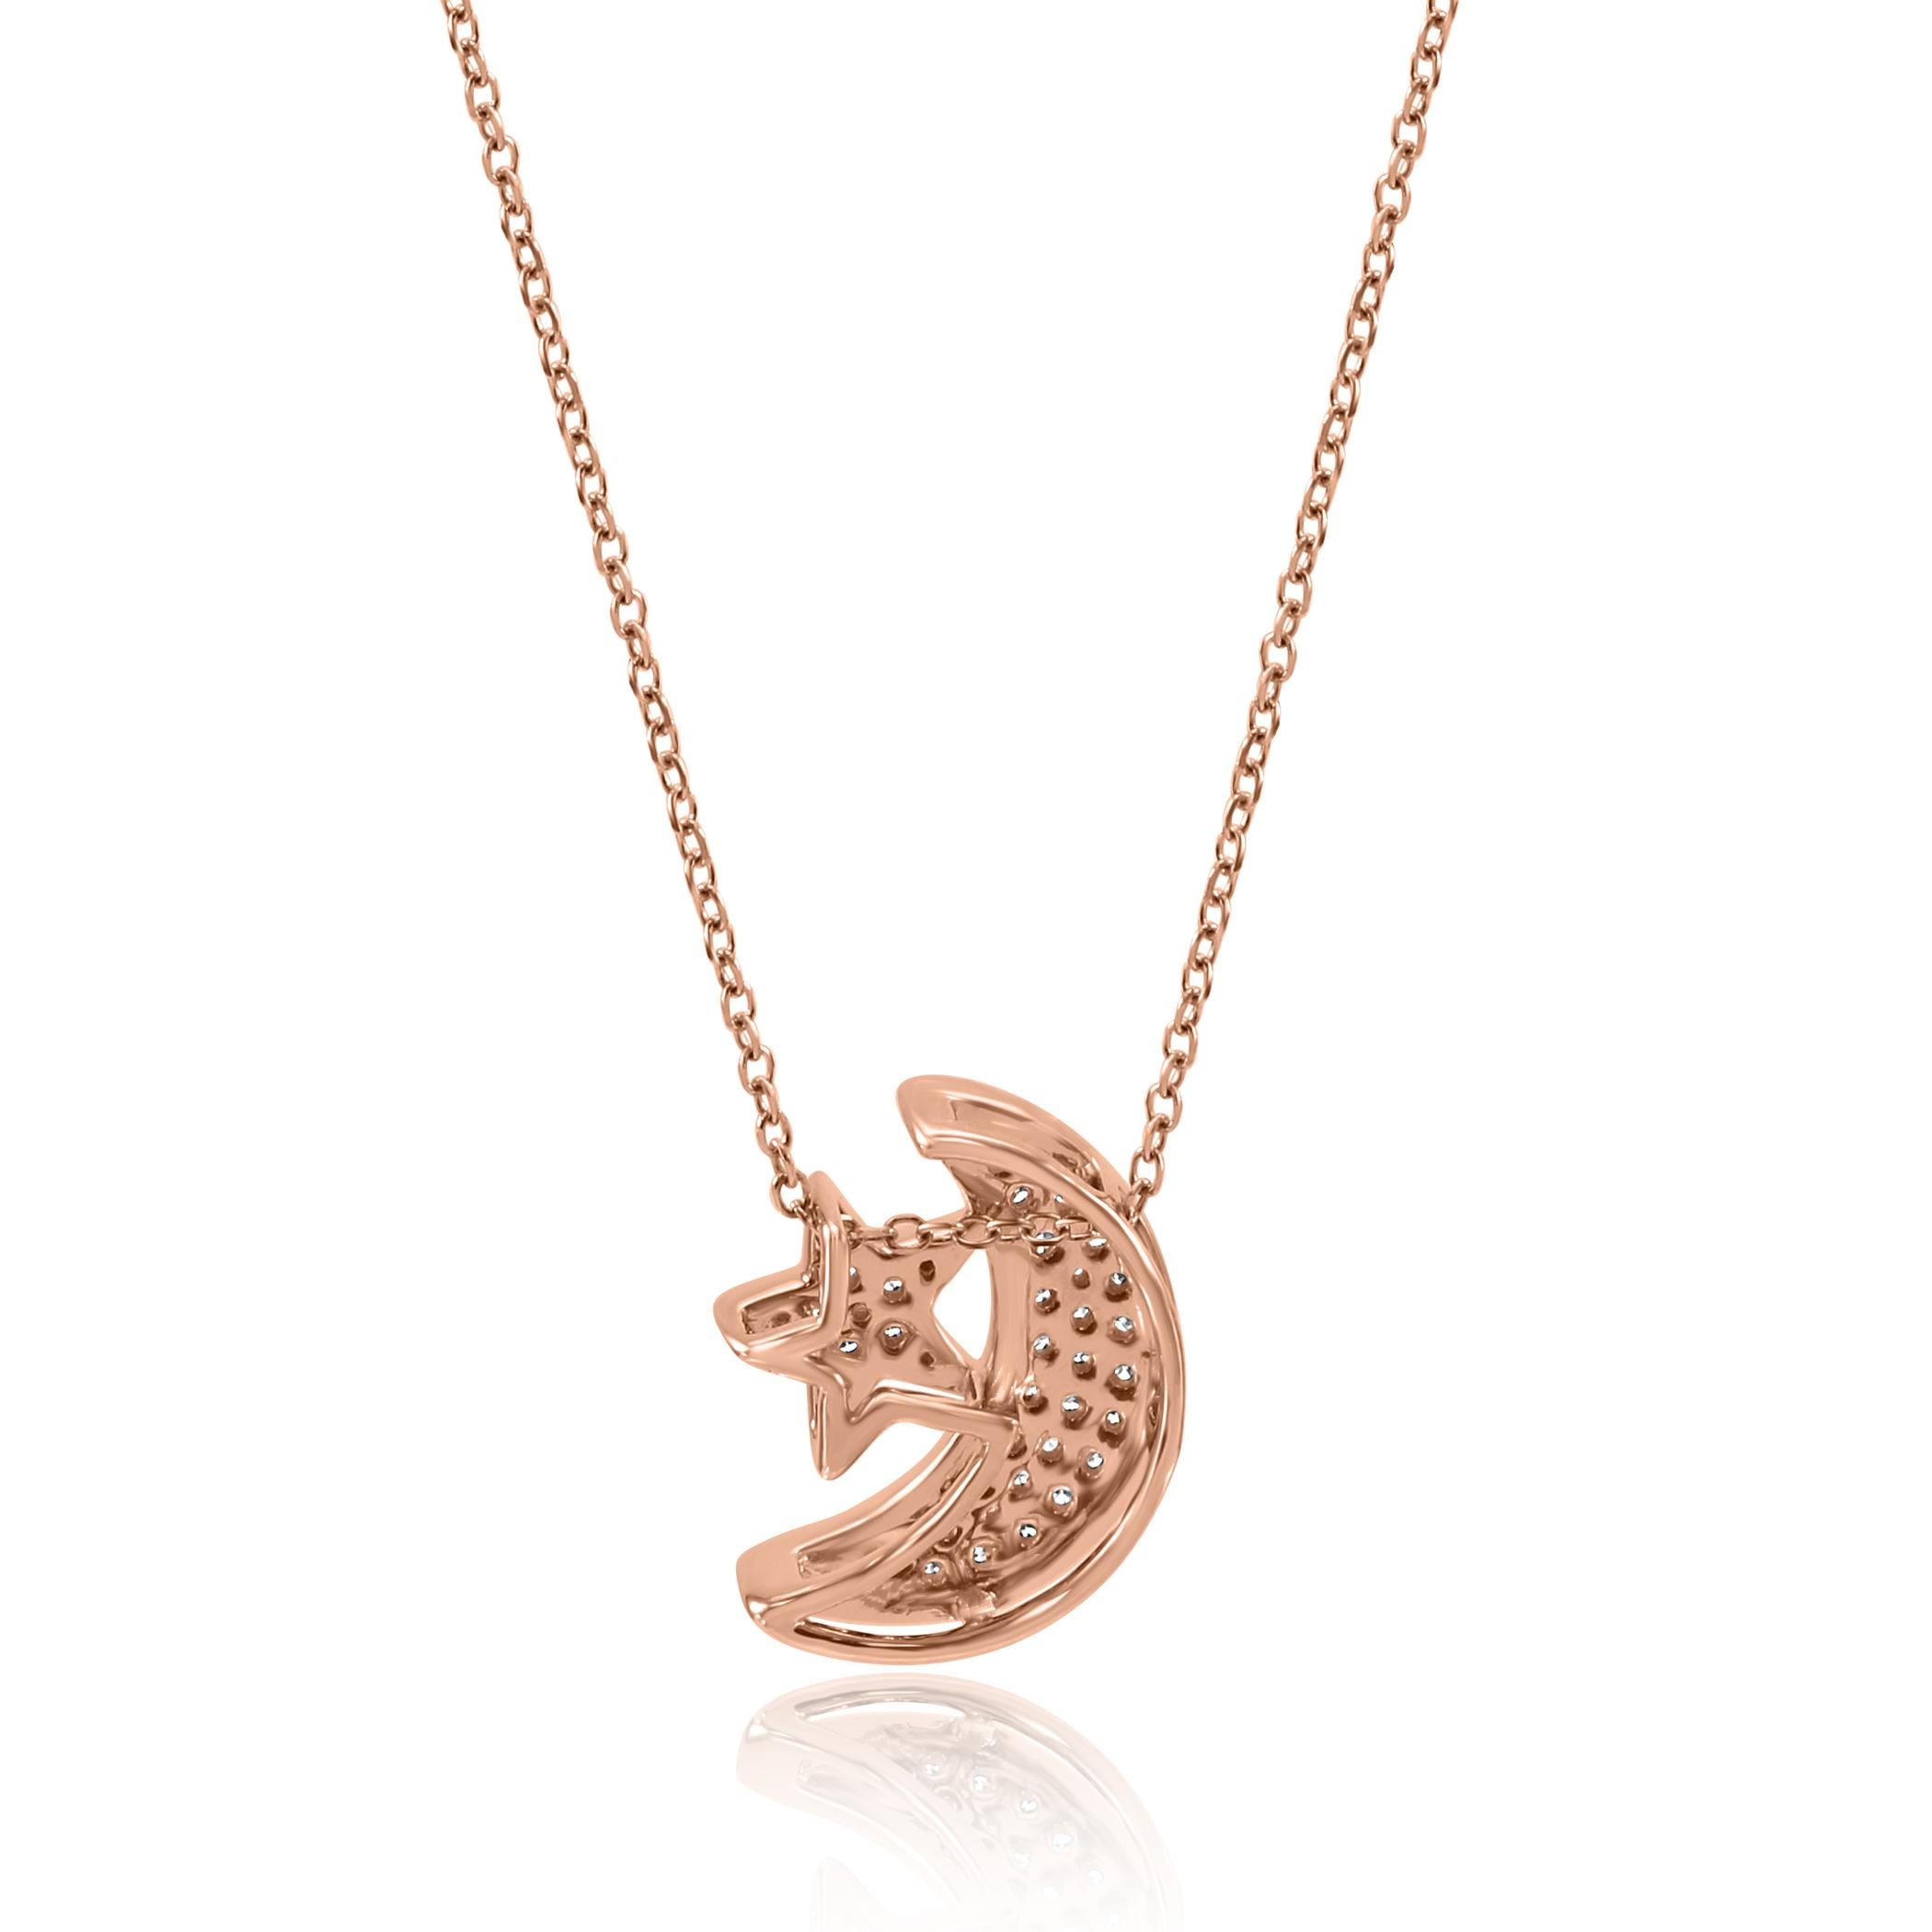 Round Cut White Diamond Round Rose Gold Moon and Star Fashion Chain Drop Pendant Necklace 